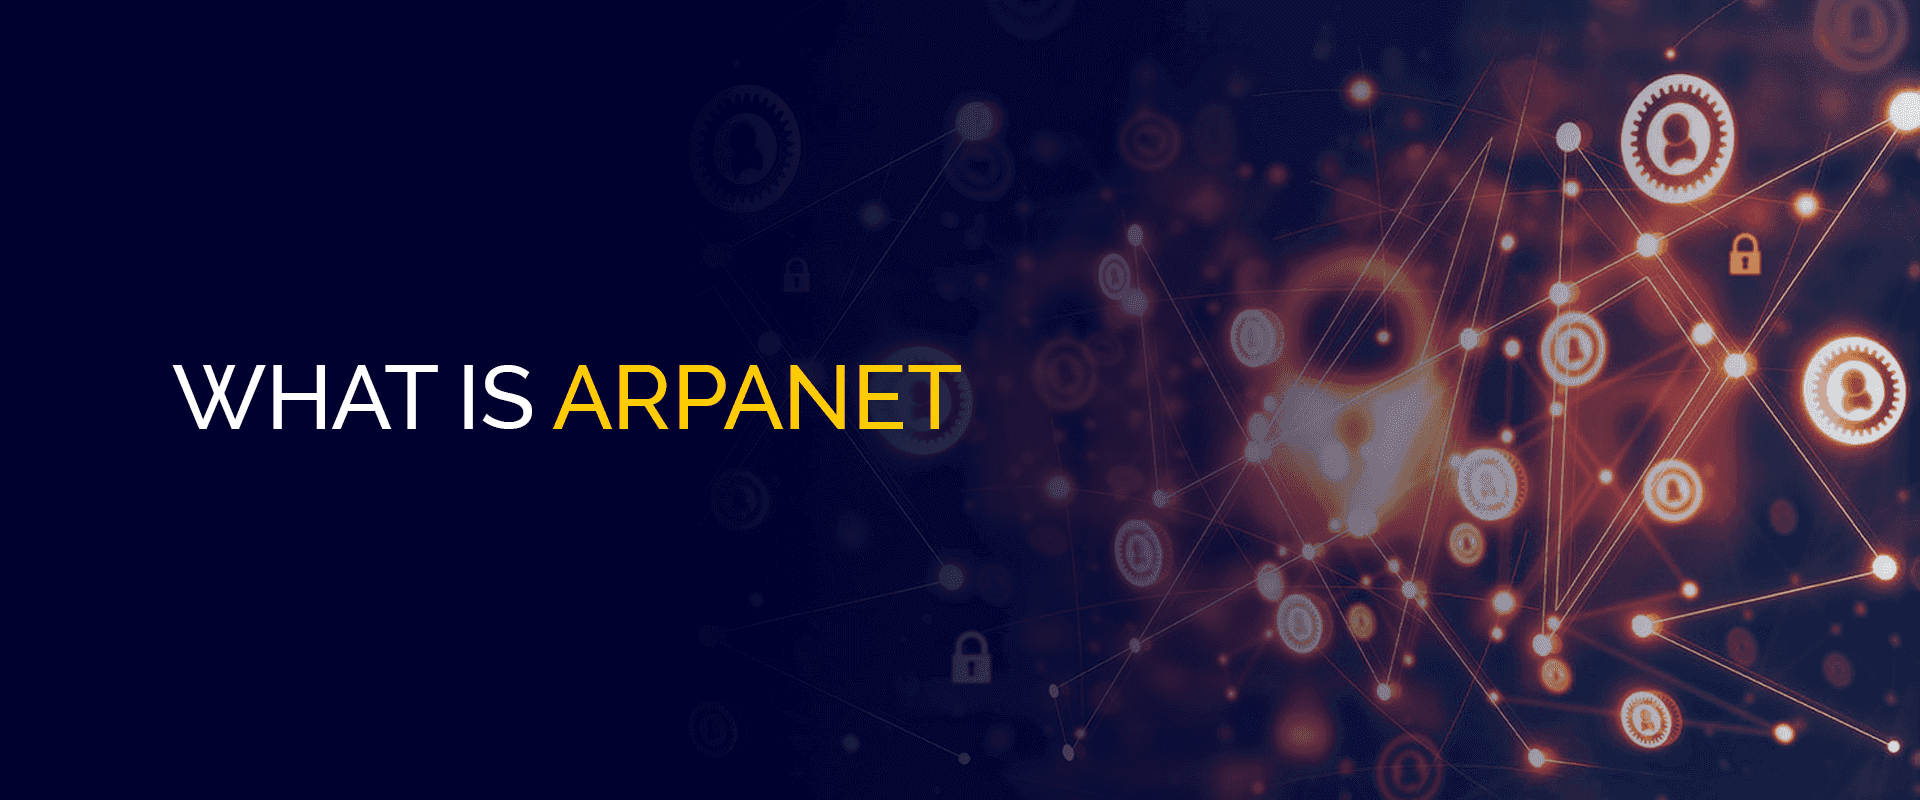 What is Arpanet